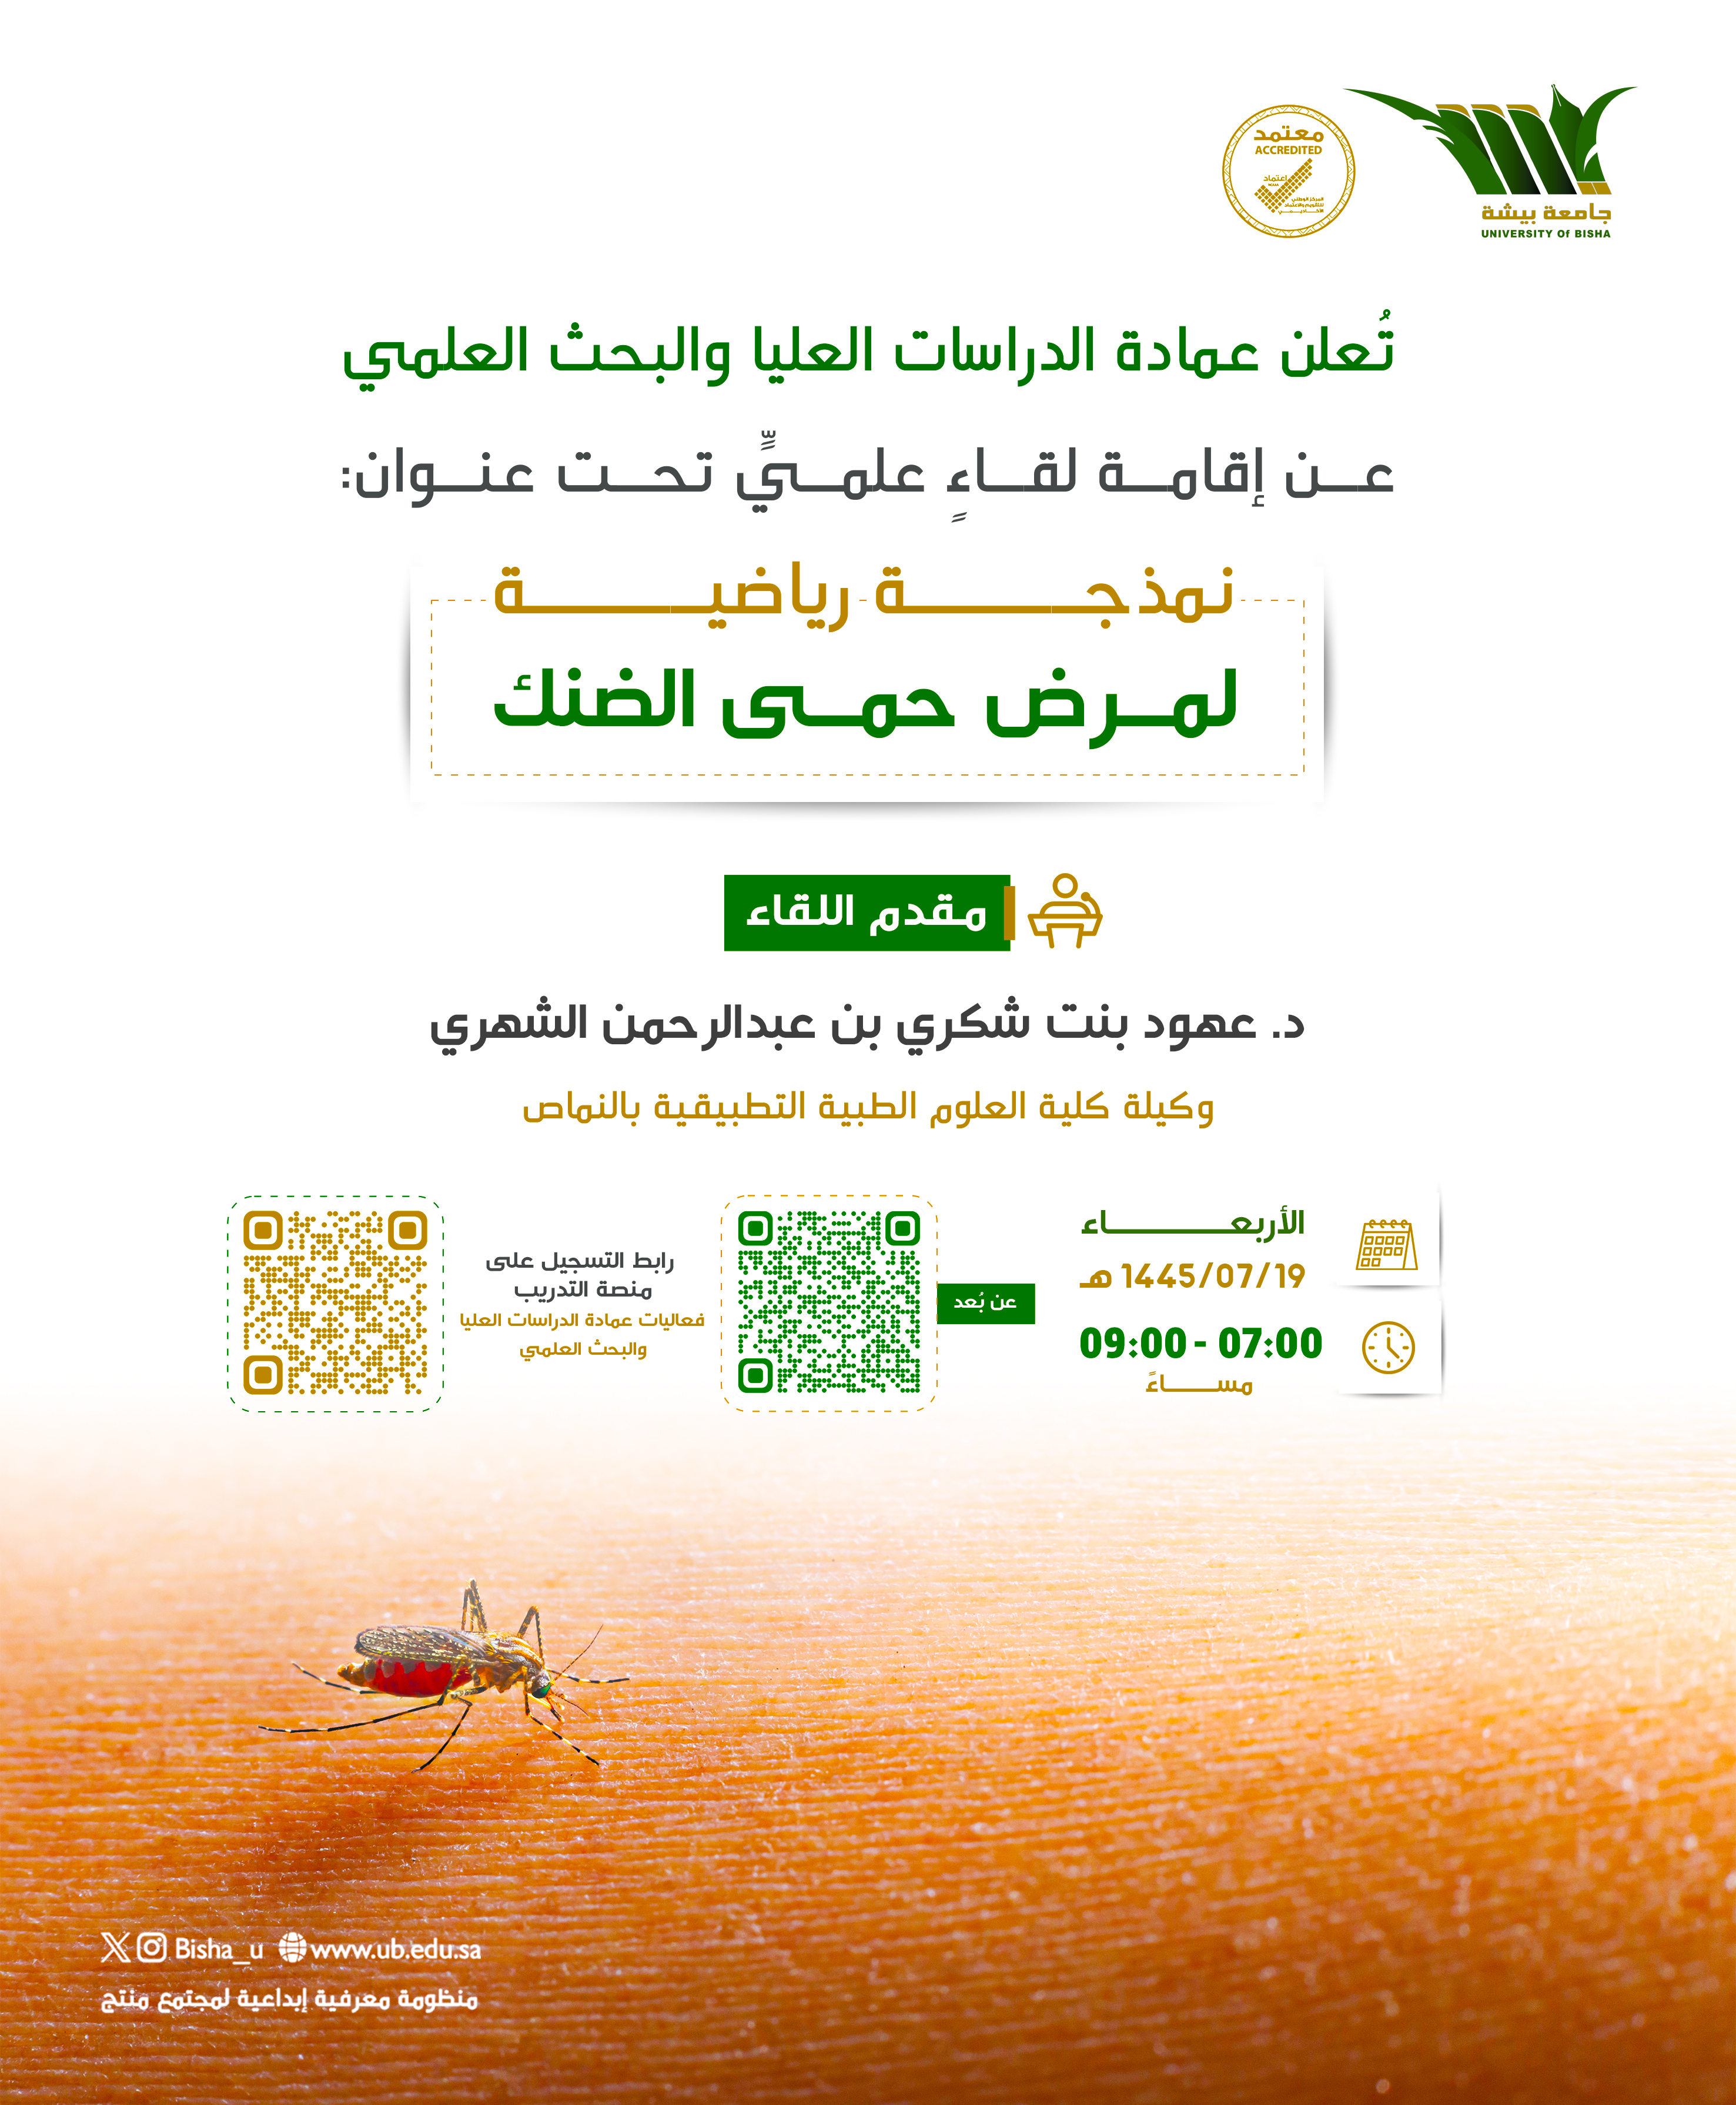 The Deanship of Graduate Studies and Scientific Research organizes a Scientific Meeting entitled: Modeling of dengue disease with impact of seasonality and vertical transmission in mosquitos in Saudi Arabia 